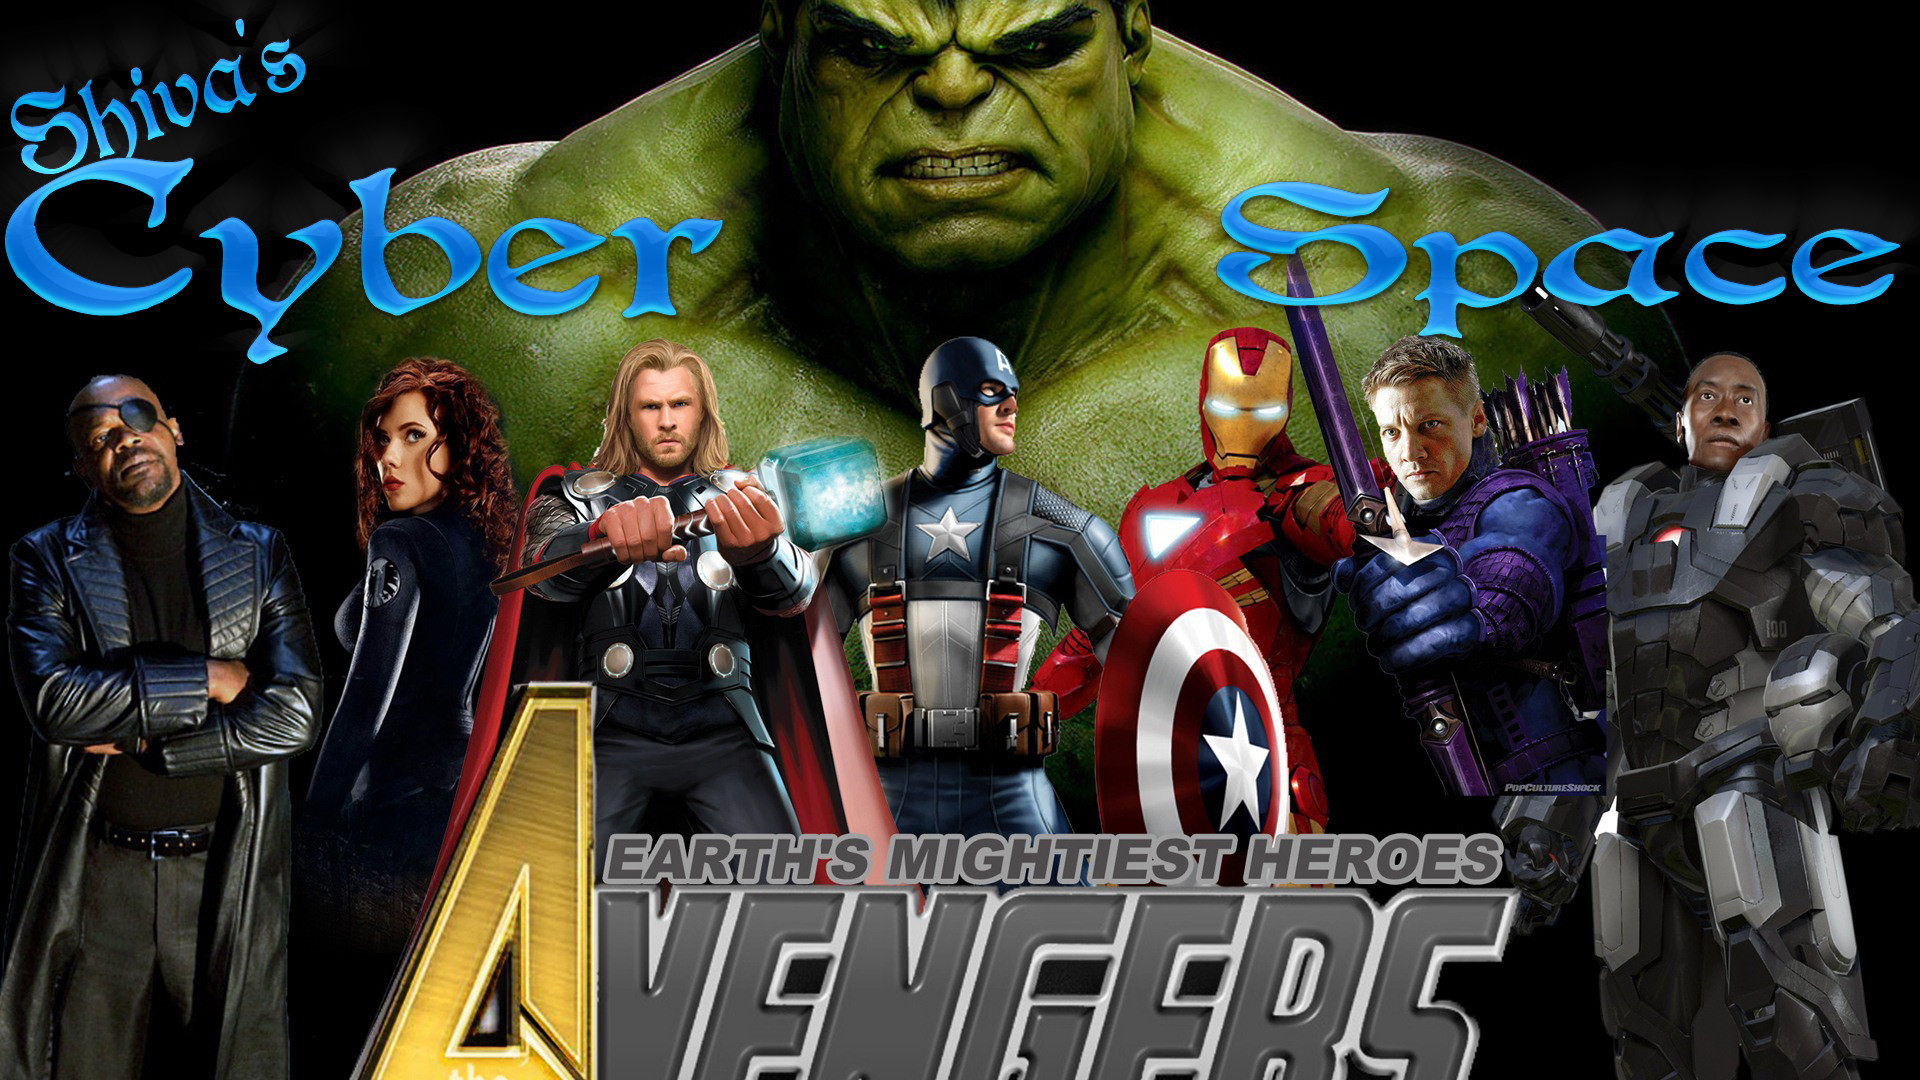 File:The-Avengers-2012-HD-Wallpapers-HD-1080p-